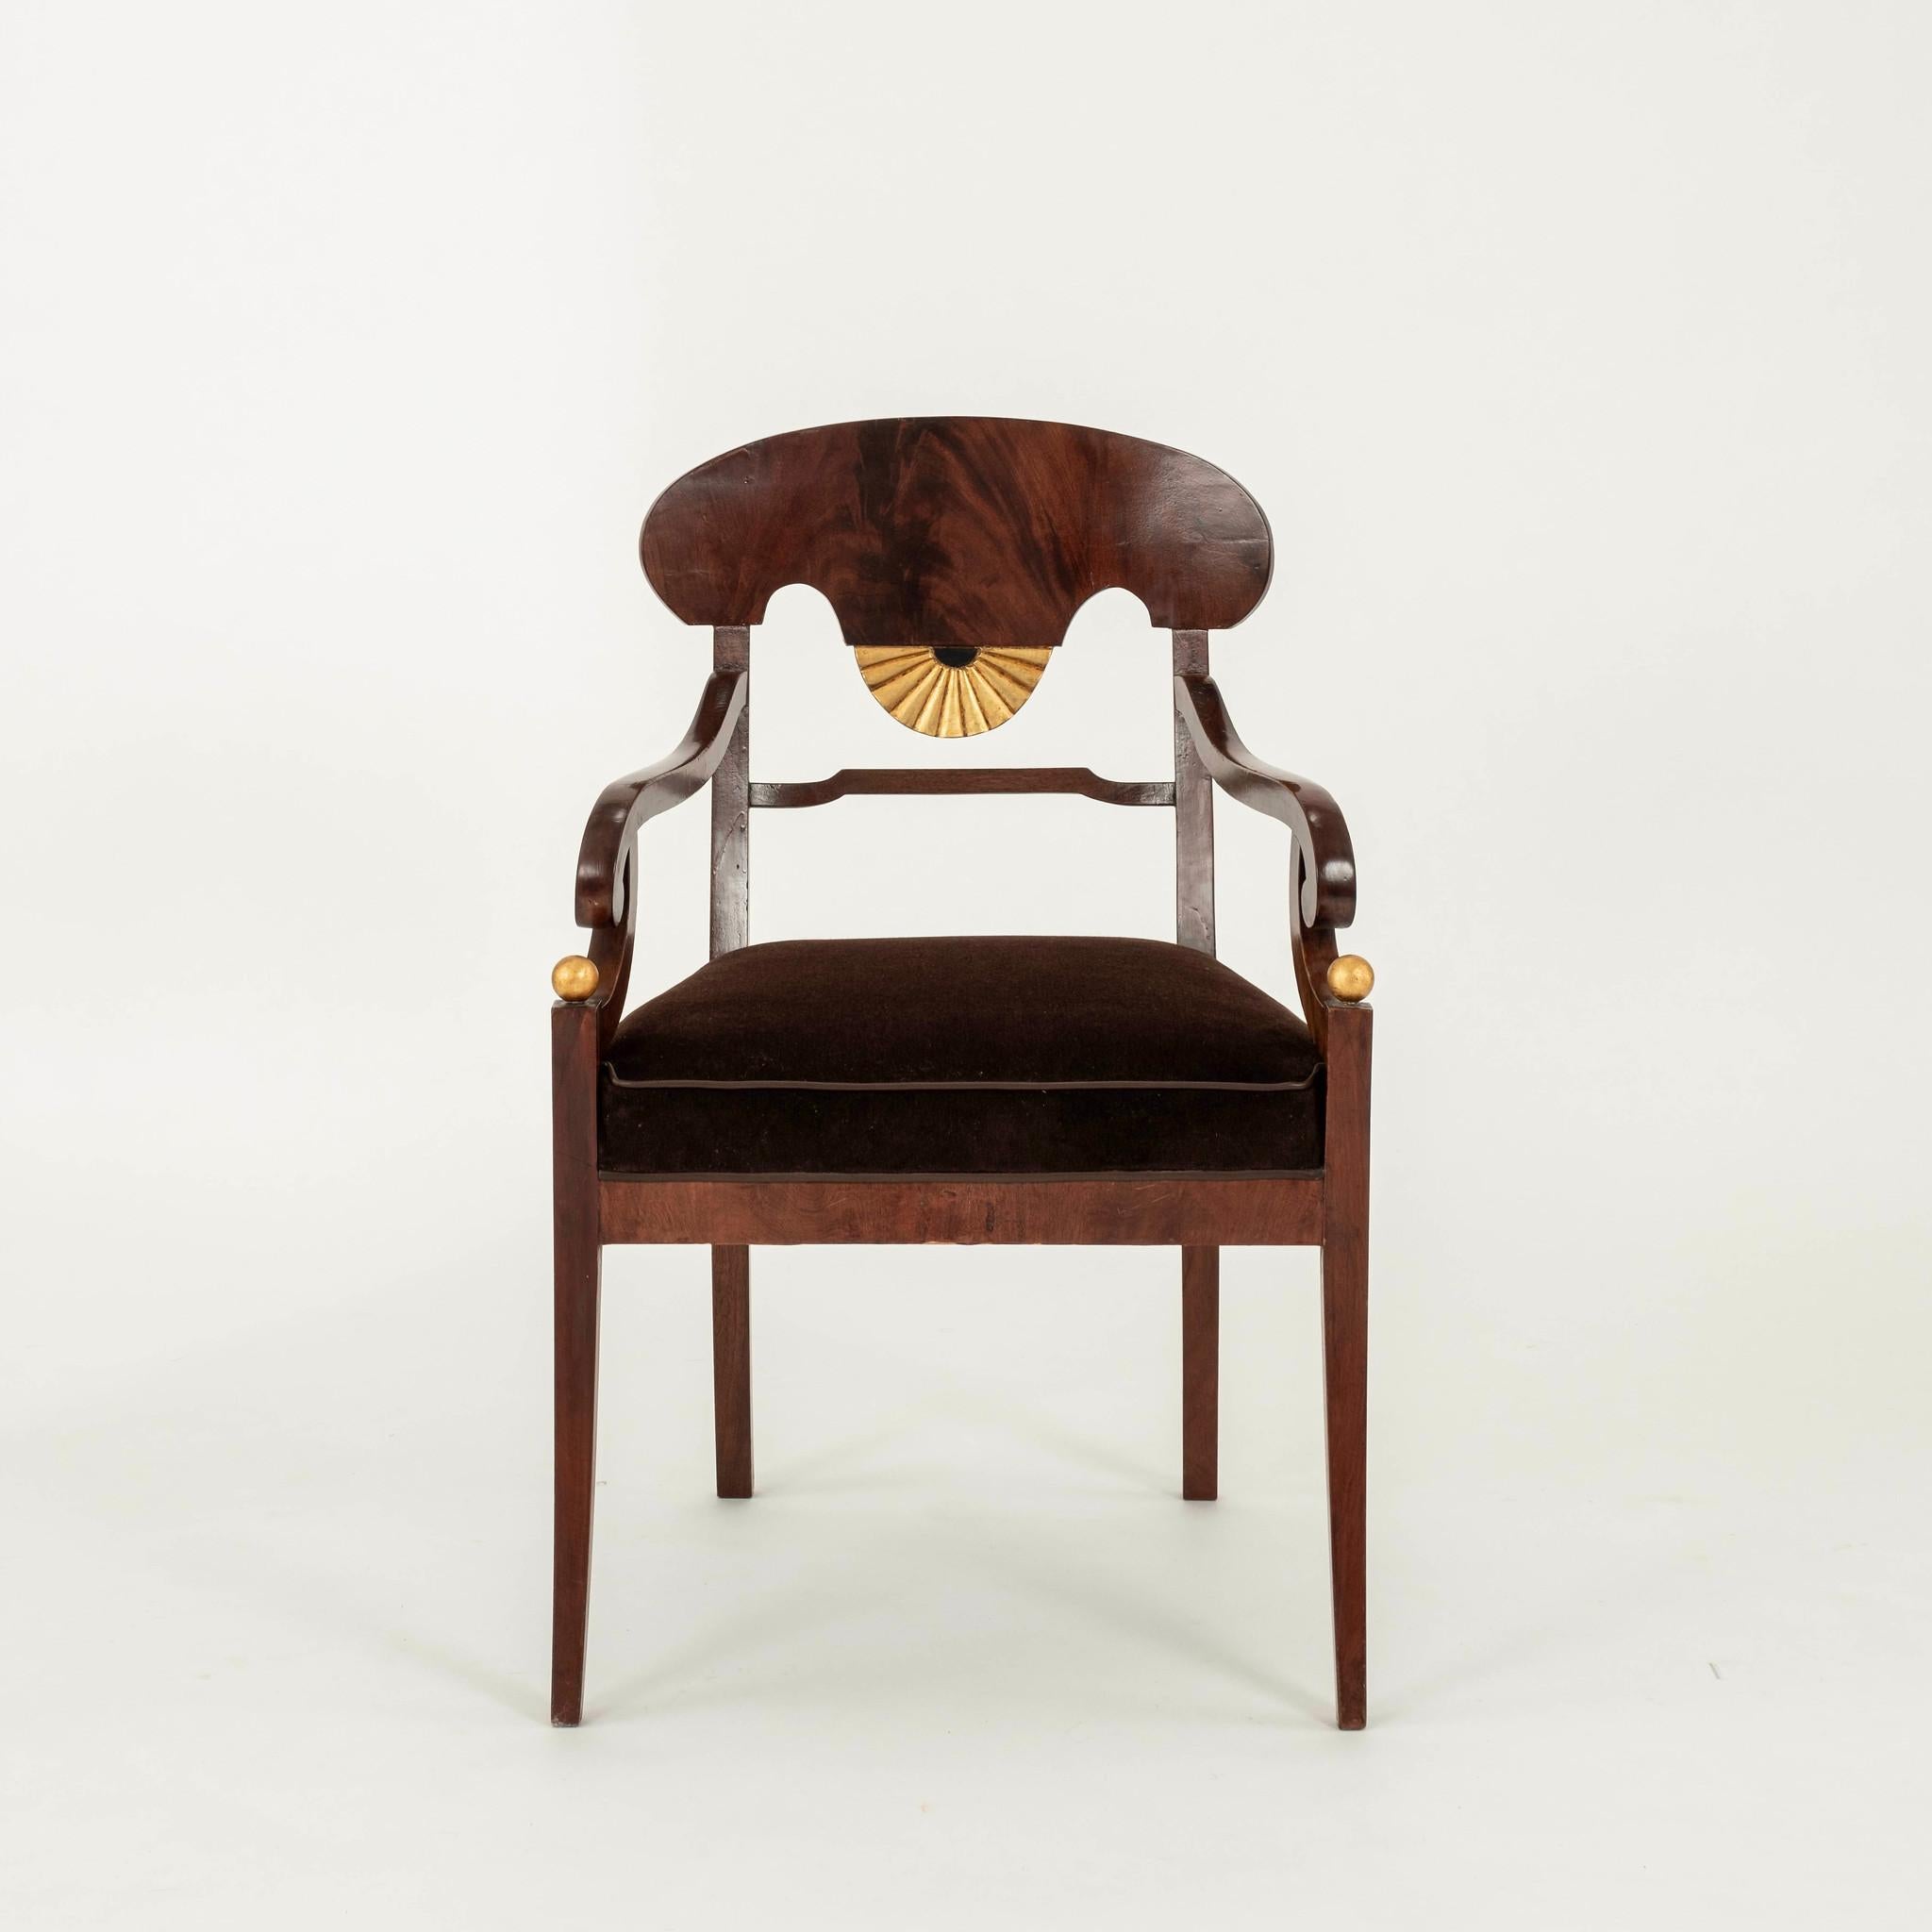 Pair of period Swedish  Biedermeier armchairs: handsome mahogany hardwoods with gilded accents newly upholstered in chocolate mohair with leather trim.